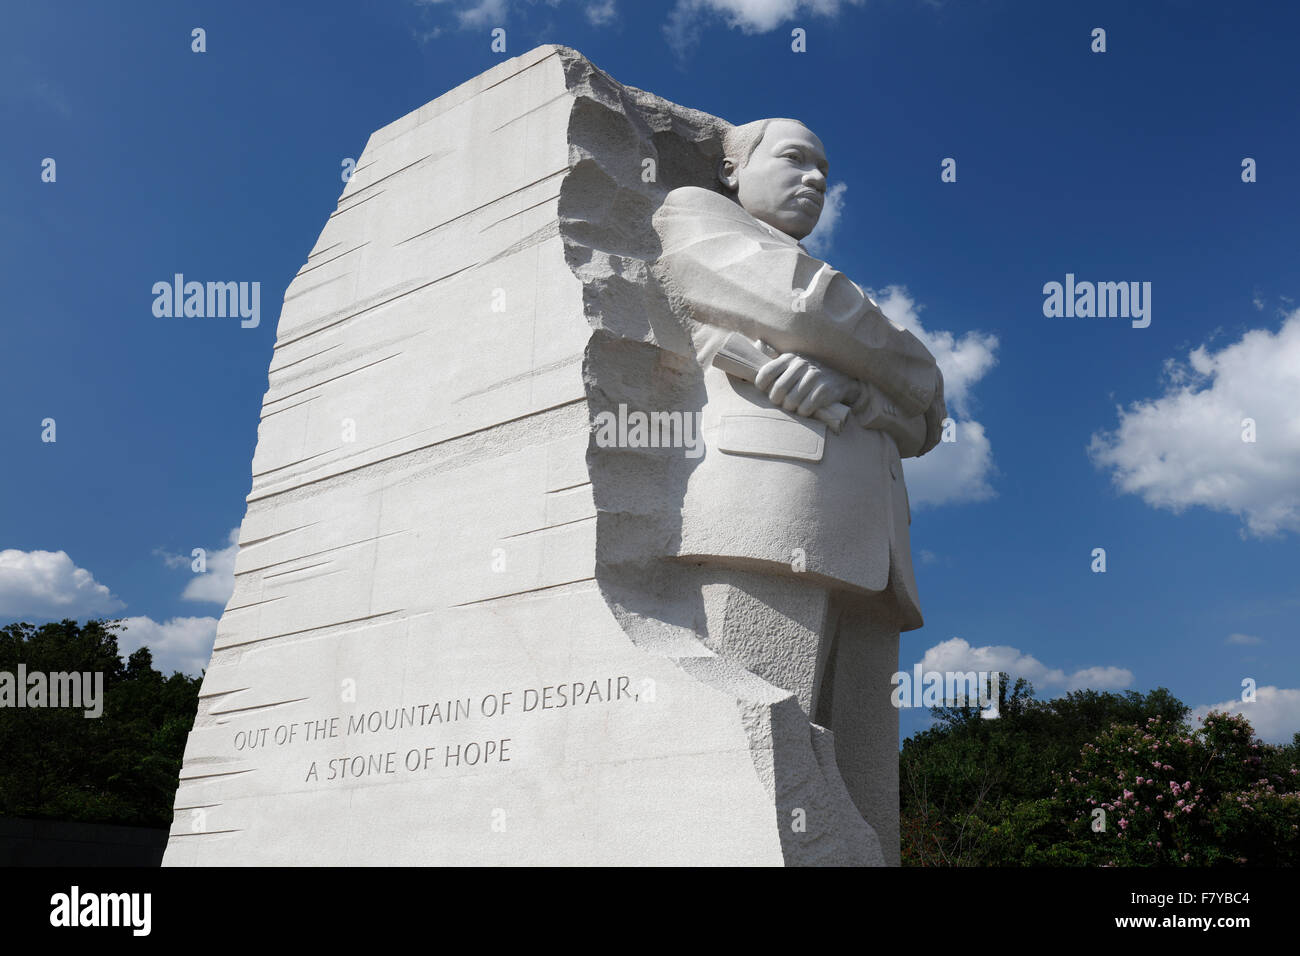 Martin Luther King Memorial, le Washington Mall, Washington, D.C., United States Banque D'Images